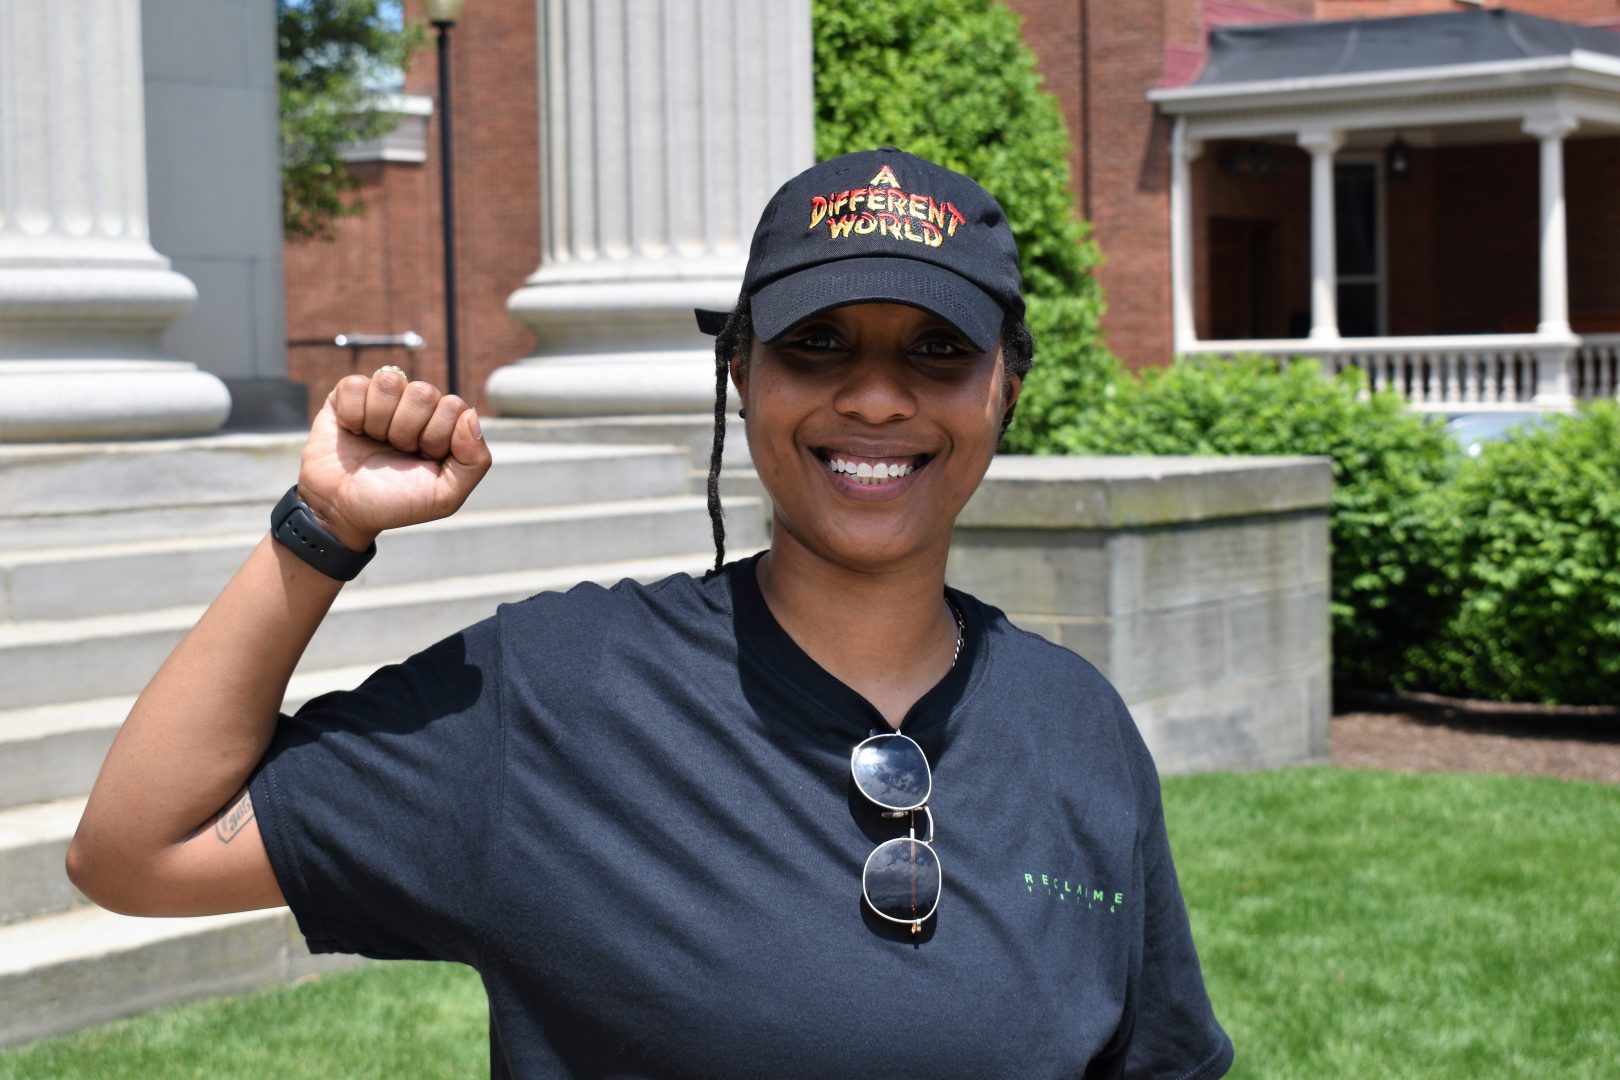 Angelica Spraggins, a founder of Erie's Black Wall Street, stands outside the Erie County Courthouse, following a Juneteenth protest on June 19, 2020.